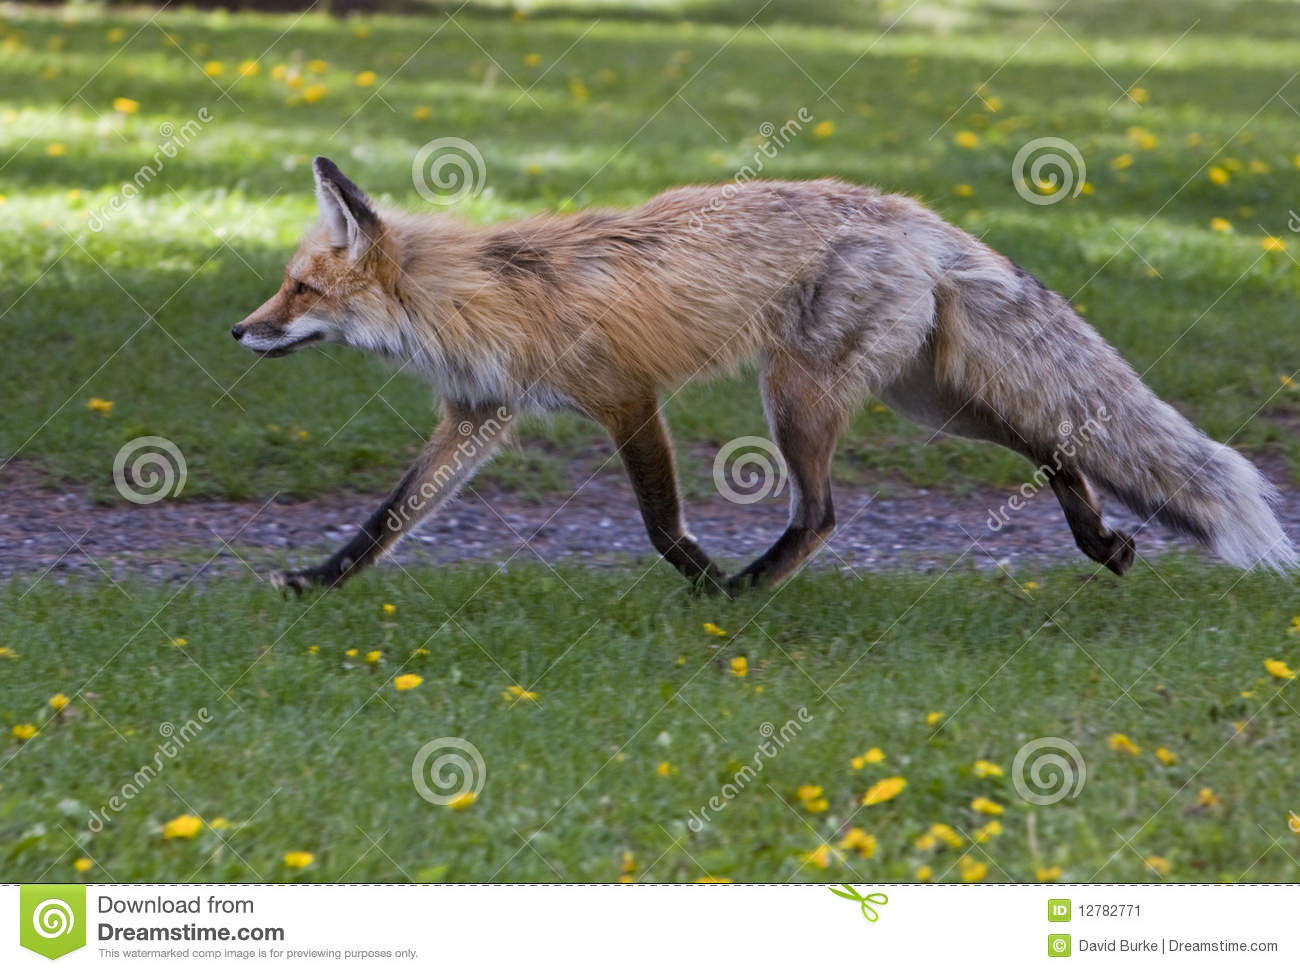 Female Adult Red Fox Stock Image   Image  12782771